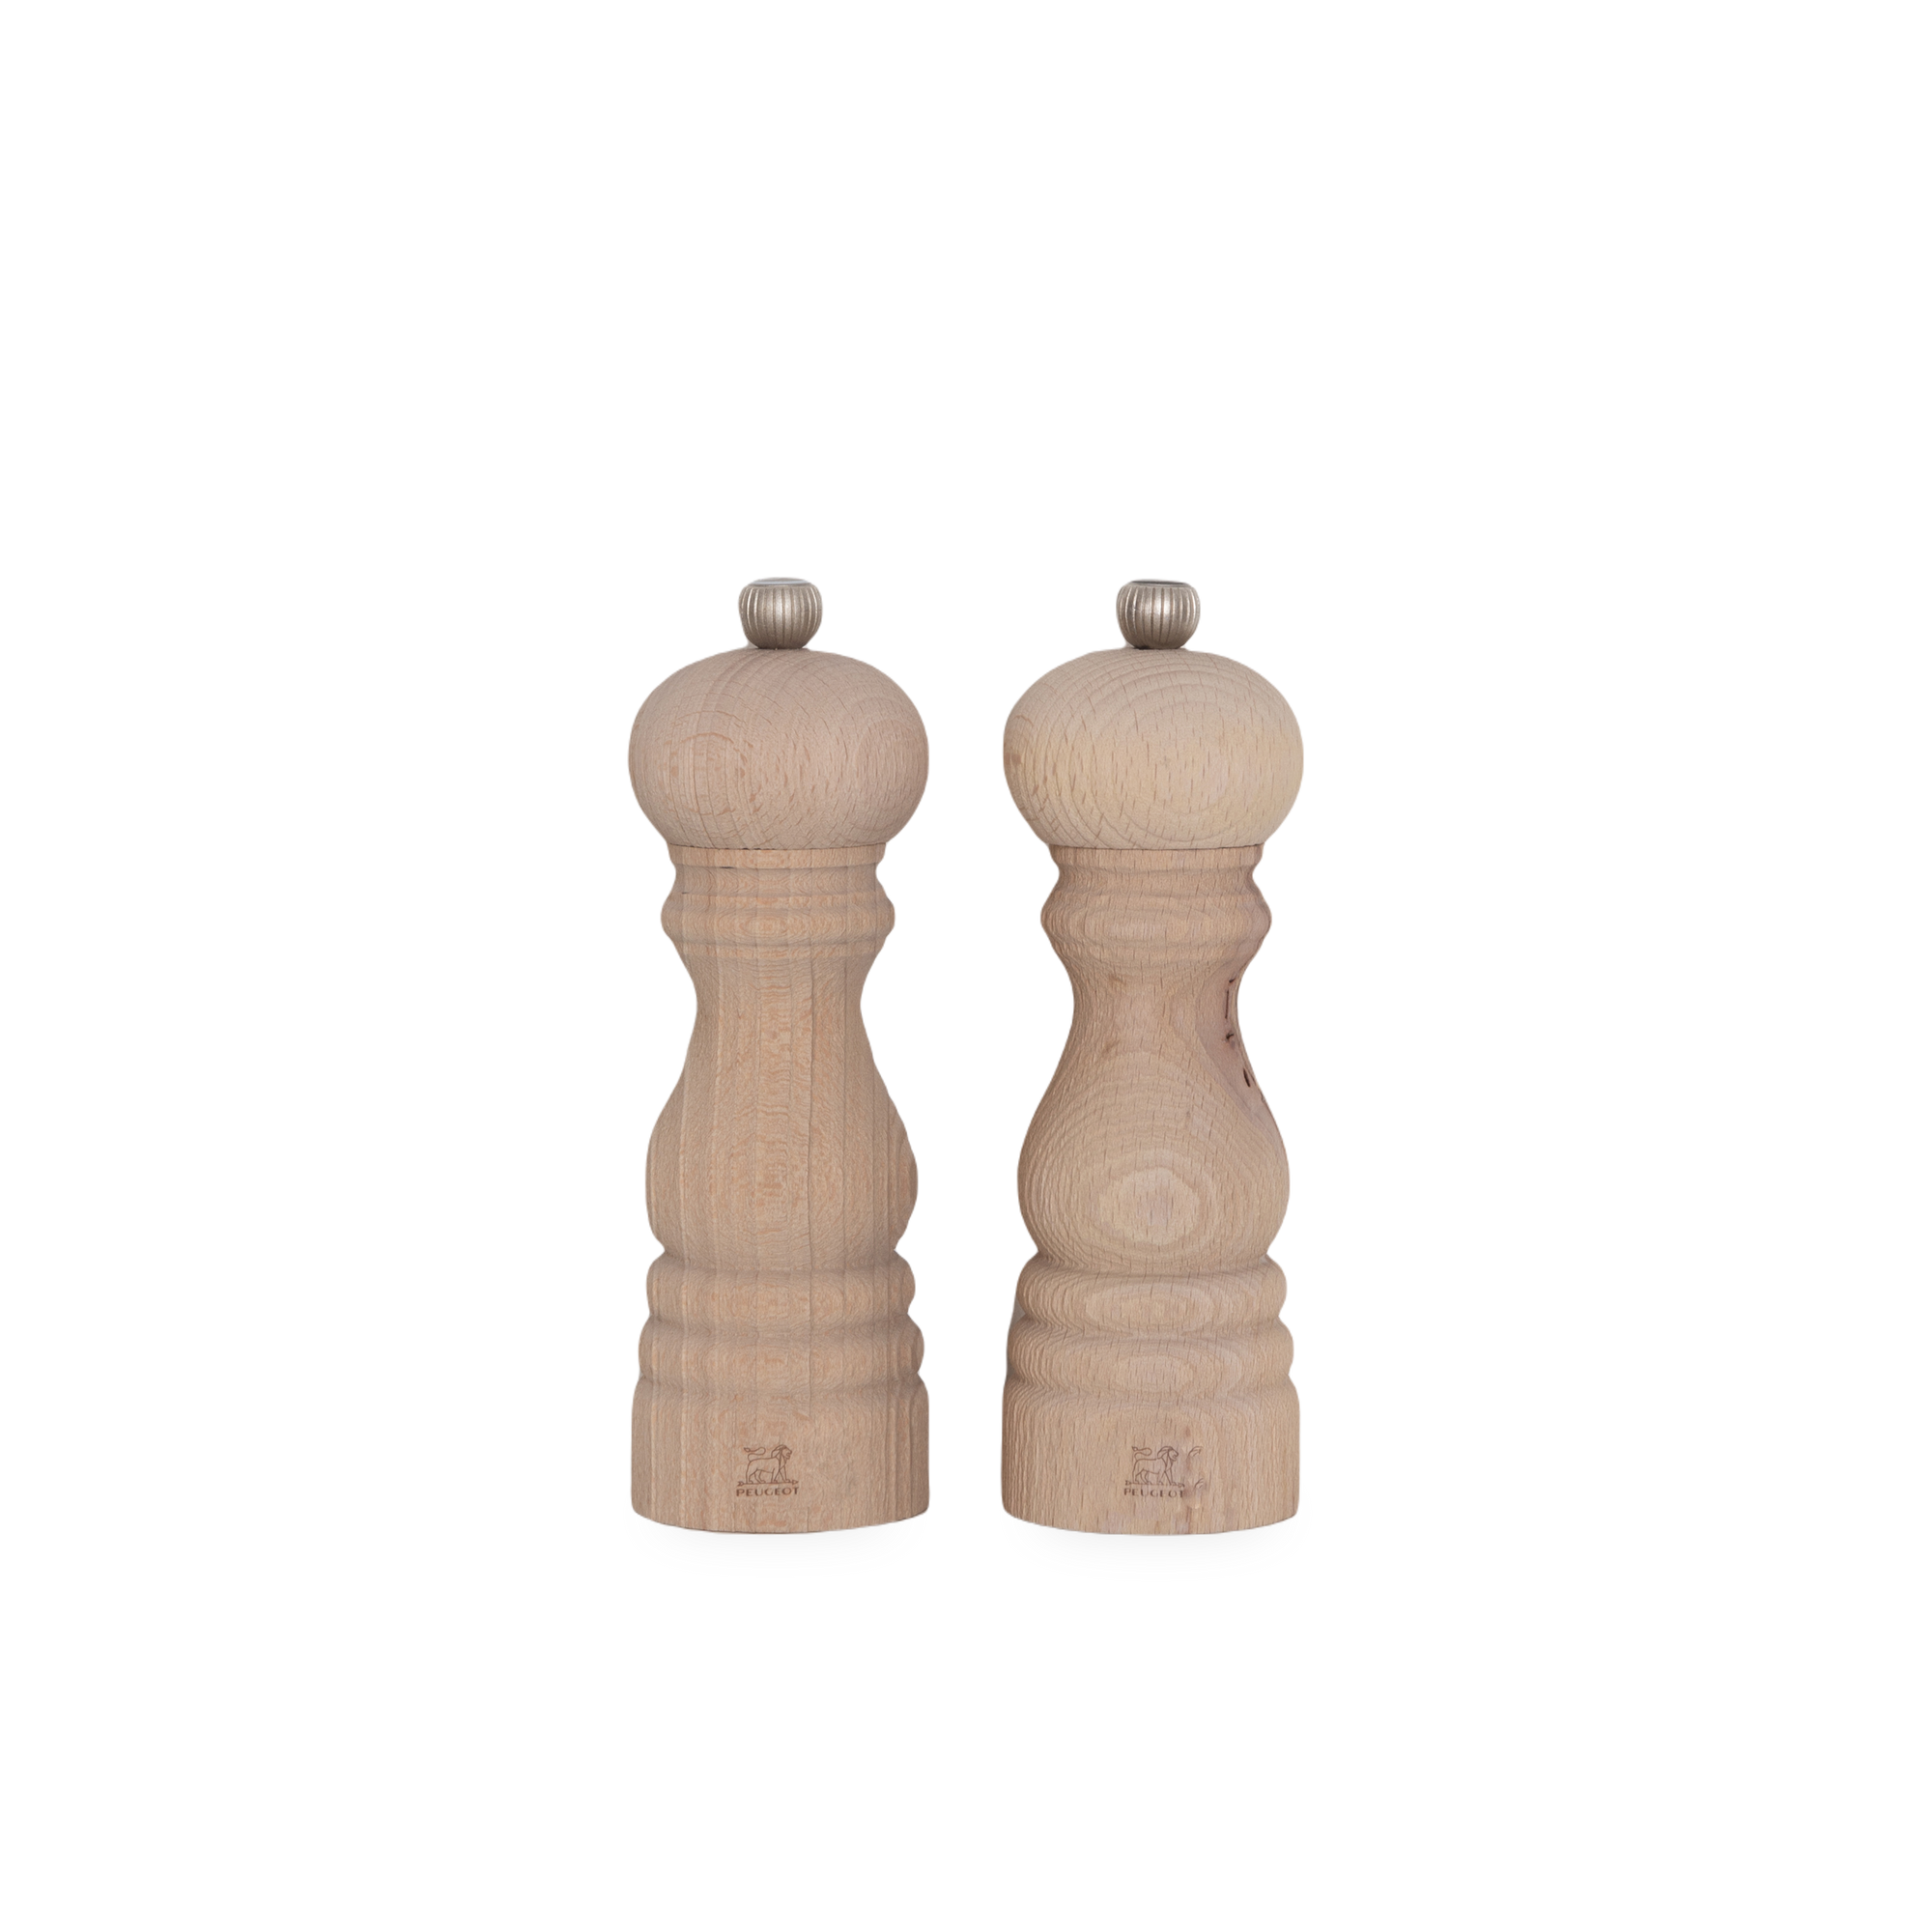 Adding an atmosphere of exquisite design to your kitchen collection, the Paris Salt and Pepper Mill were designed by Peugeot with a focus on high-quality natural materials.